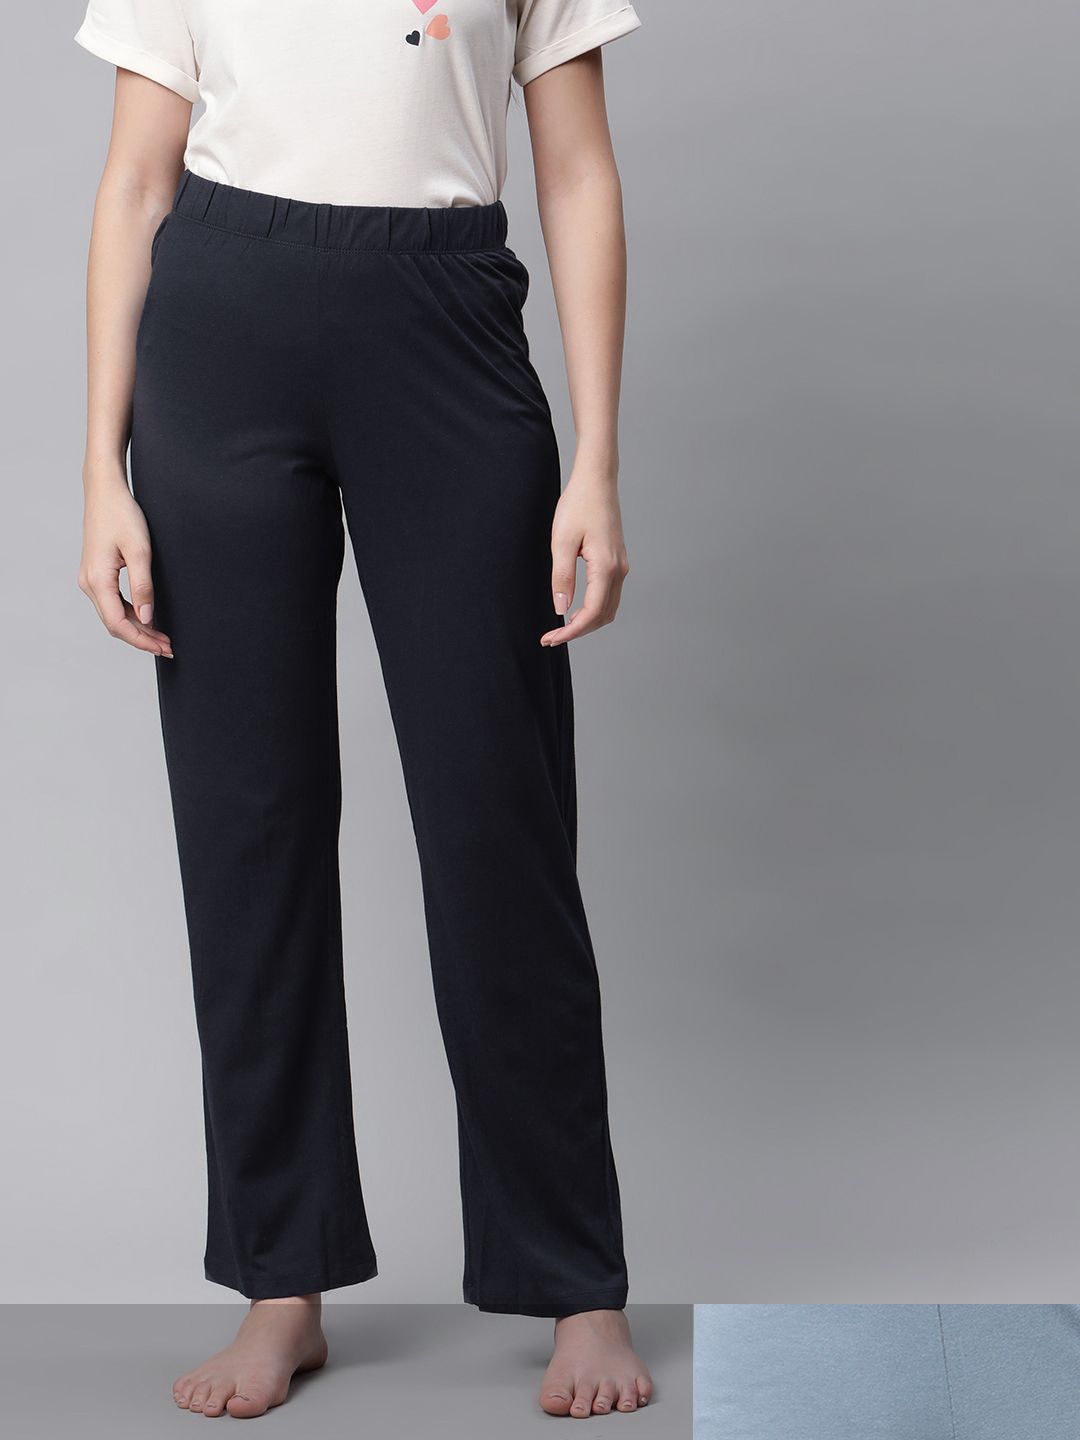 Marks & Spencer Women Pack of 2 Solid Straight Lounge Pants Price in India